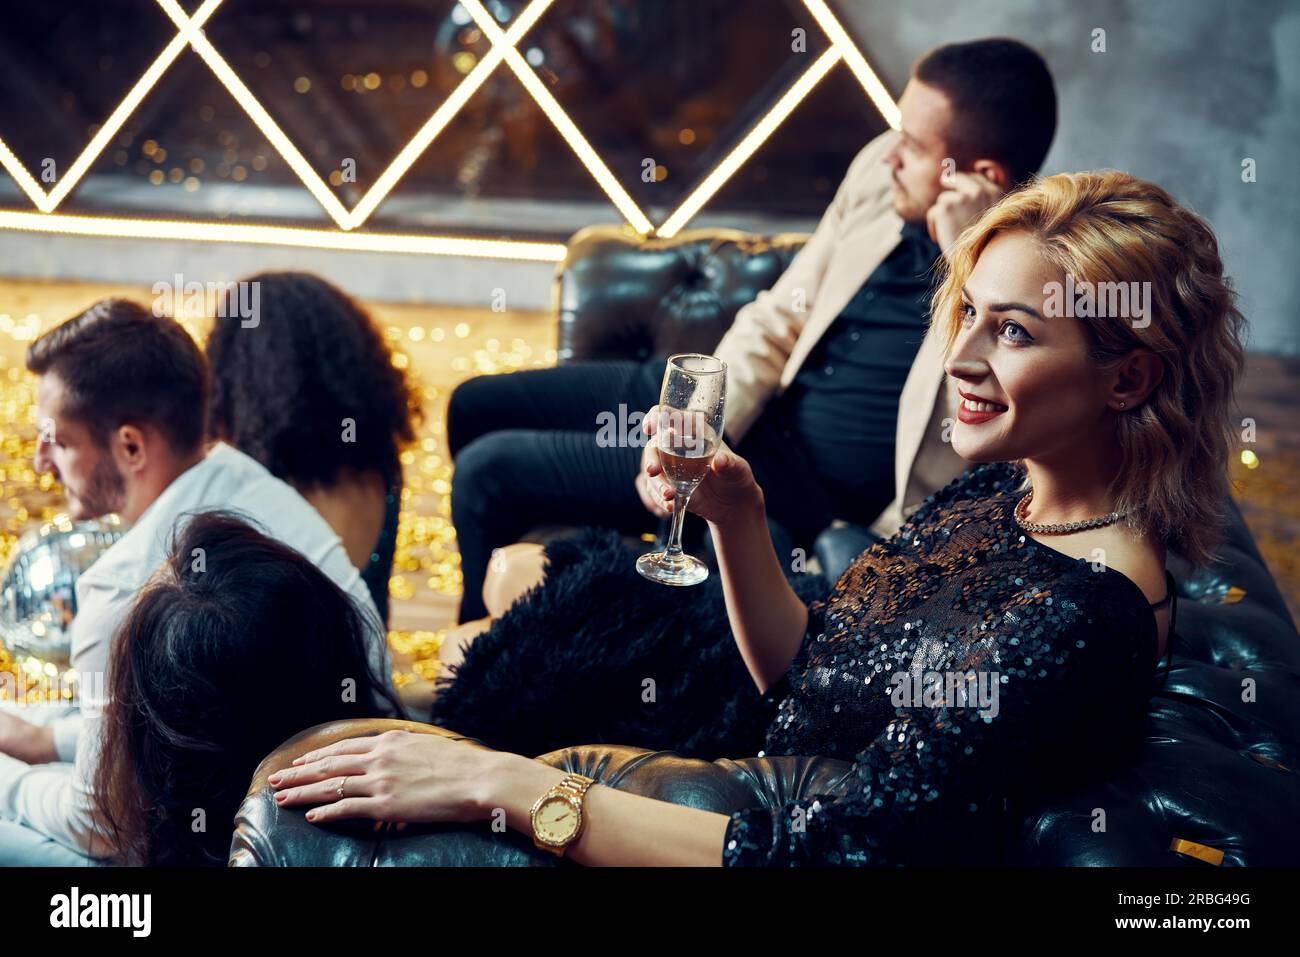 Diverse group of young friends hang out and drink champagne at night club. People enjoy party and have fun concept Stock Photo